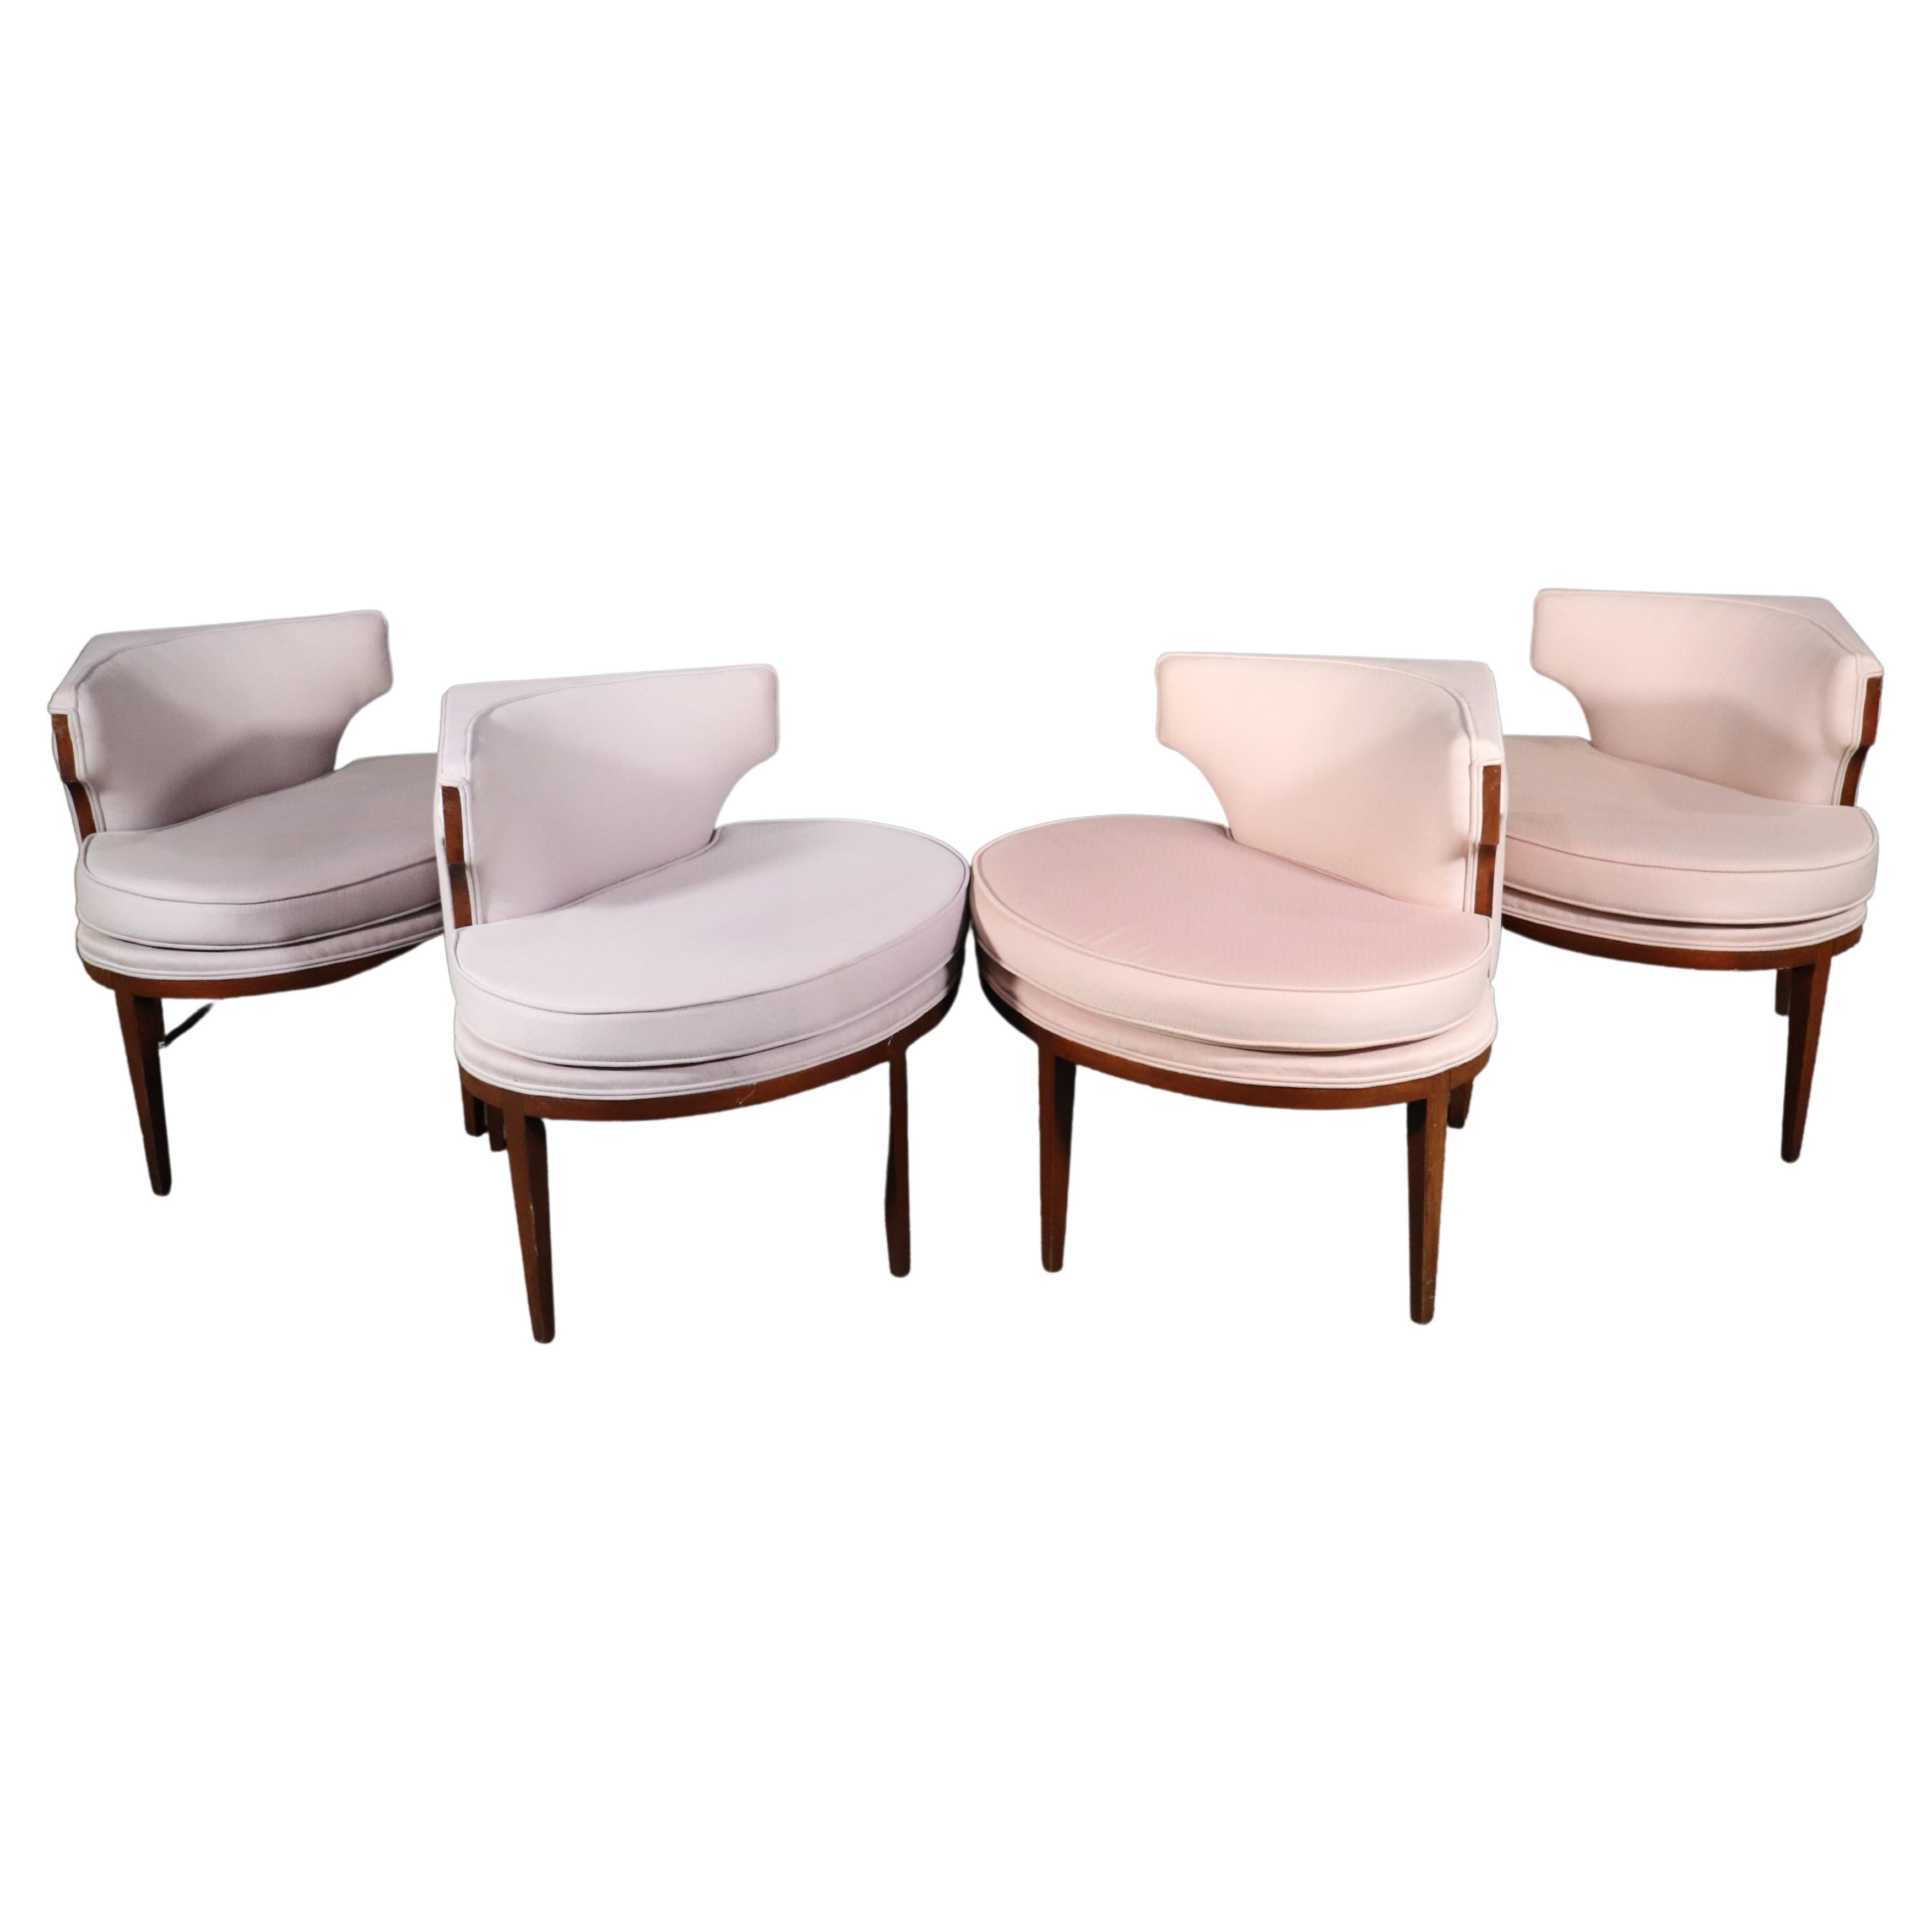 Four Vintage Modern Corner Chairs For Sale